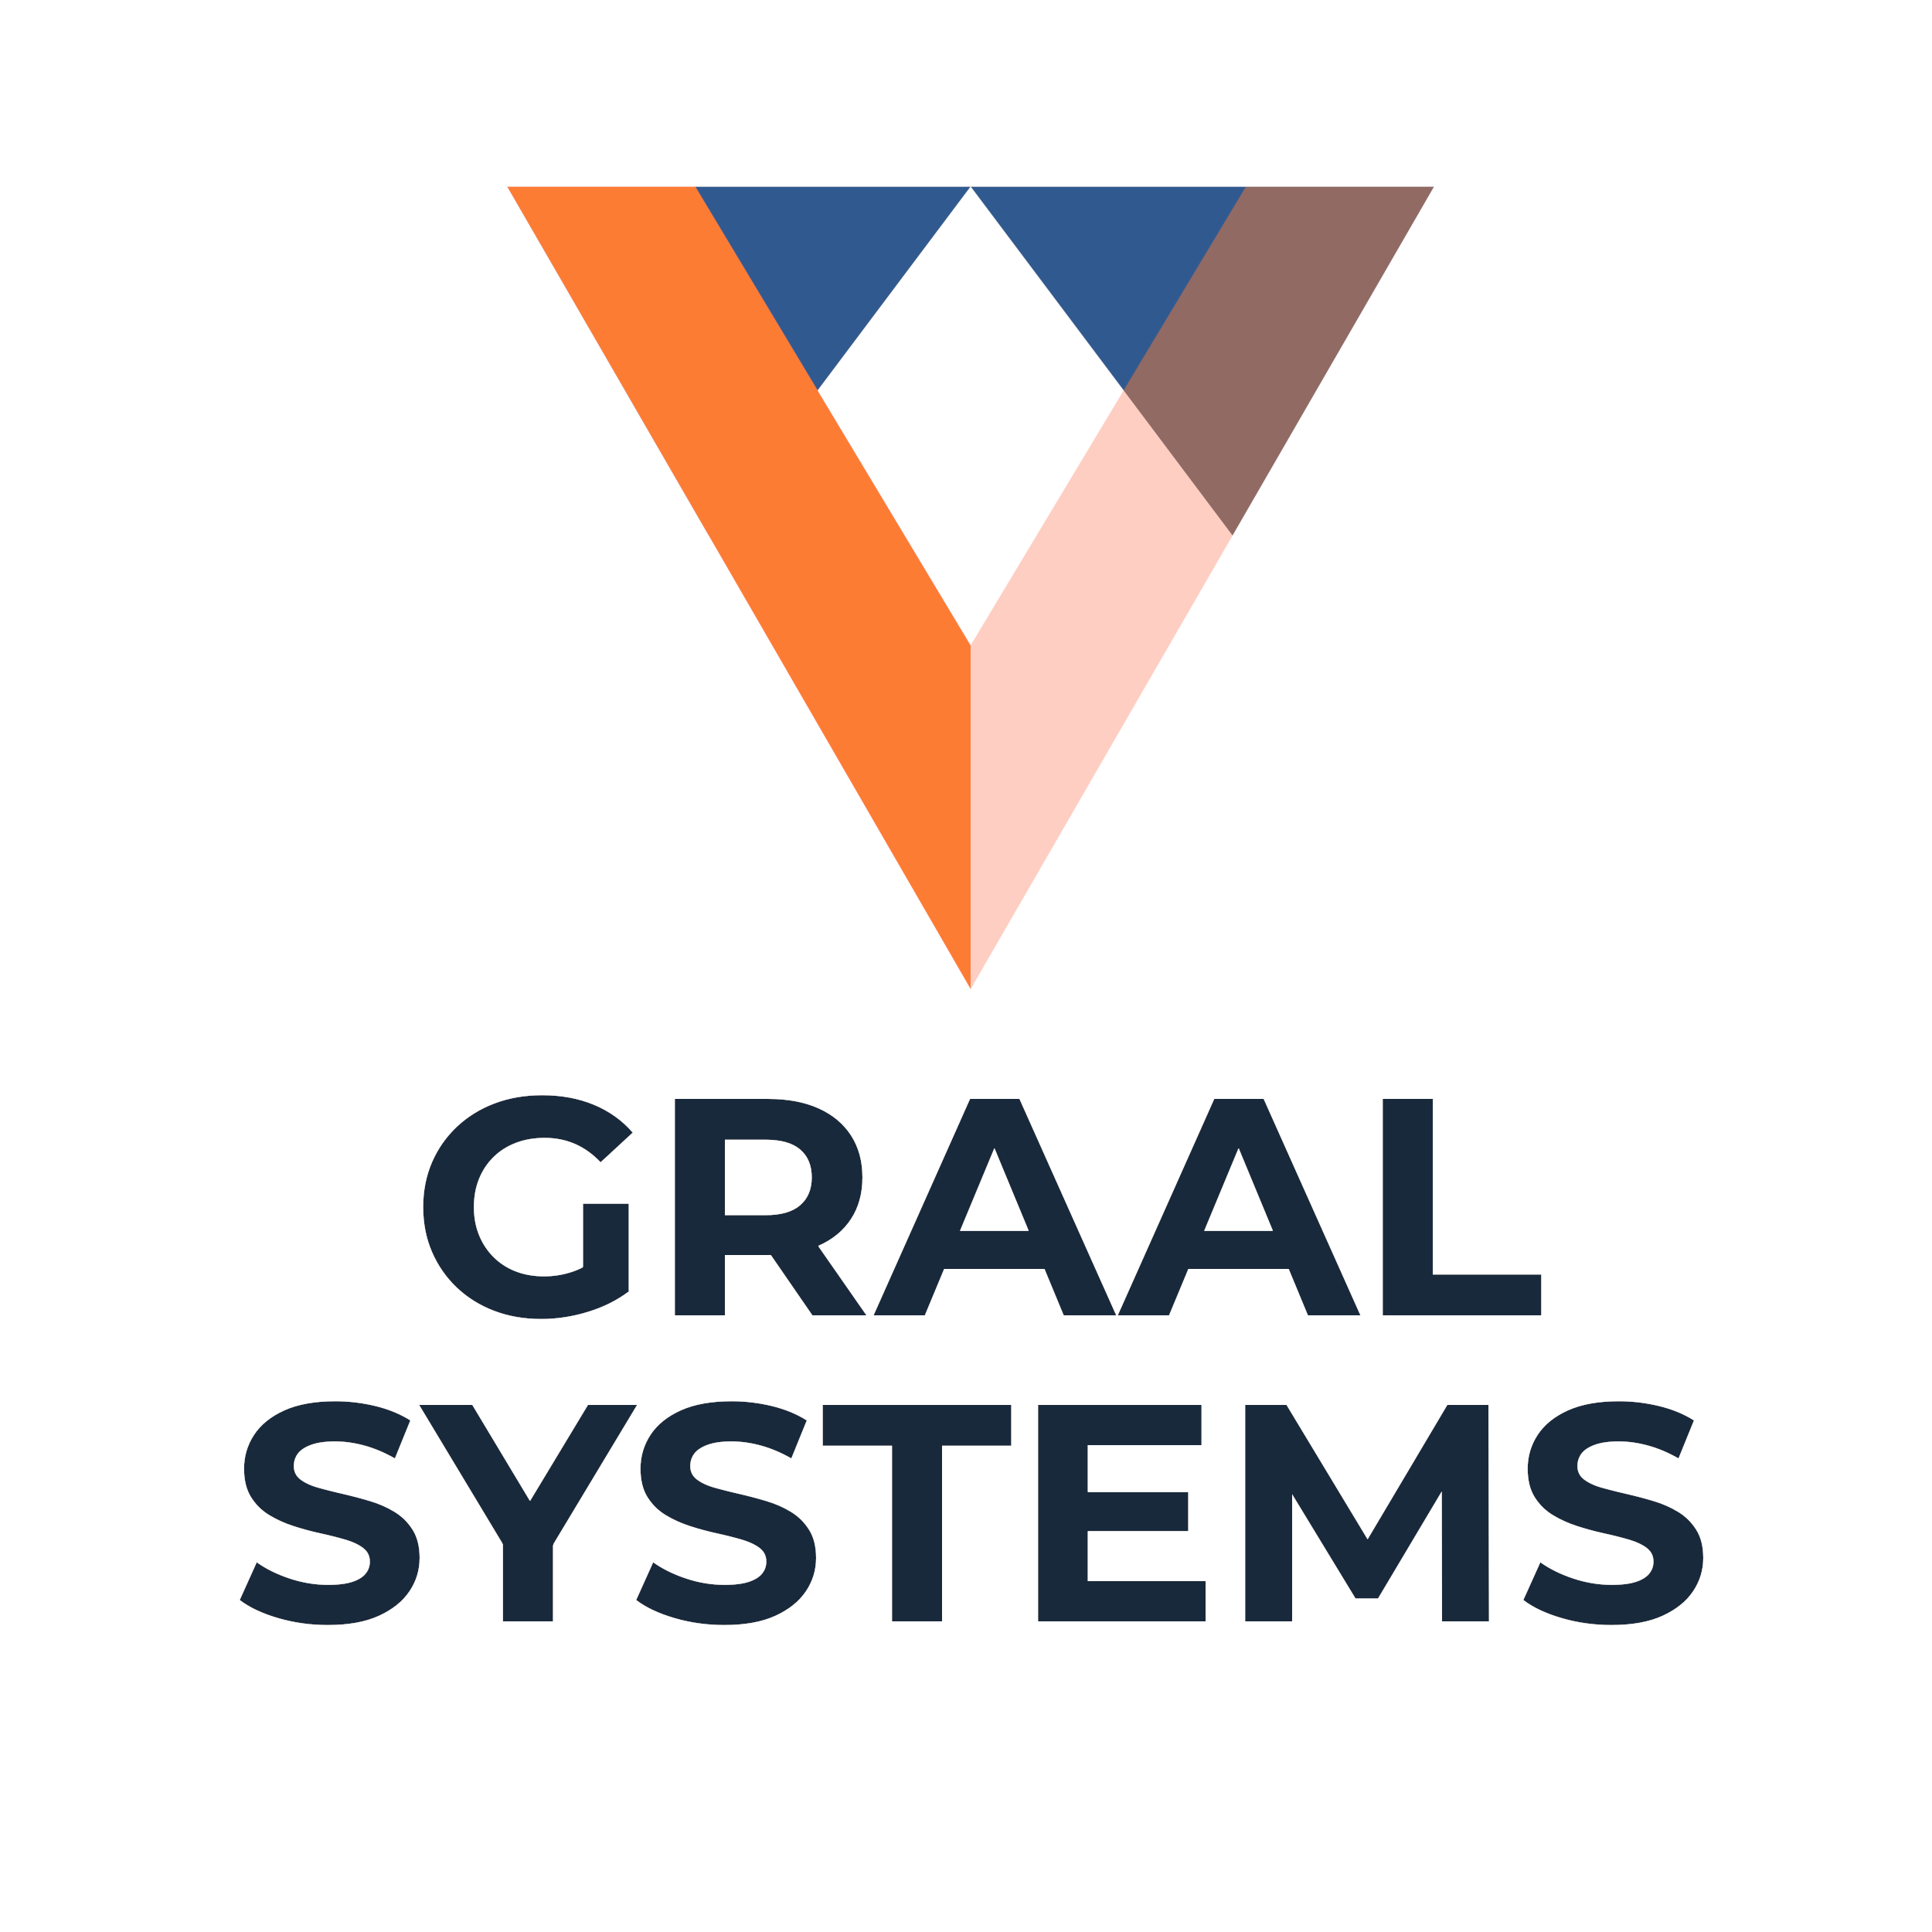 GRAAL SYSTEMS